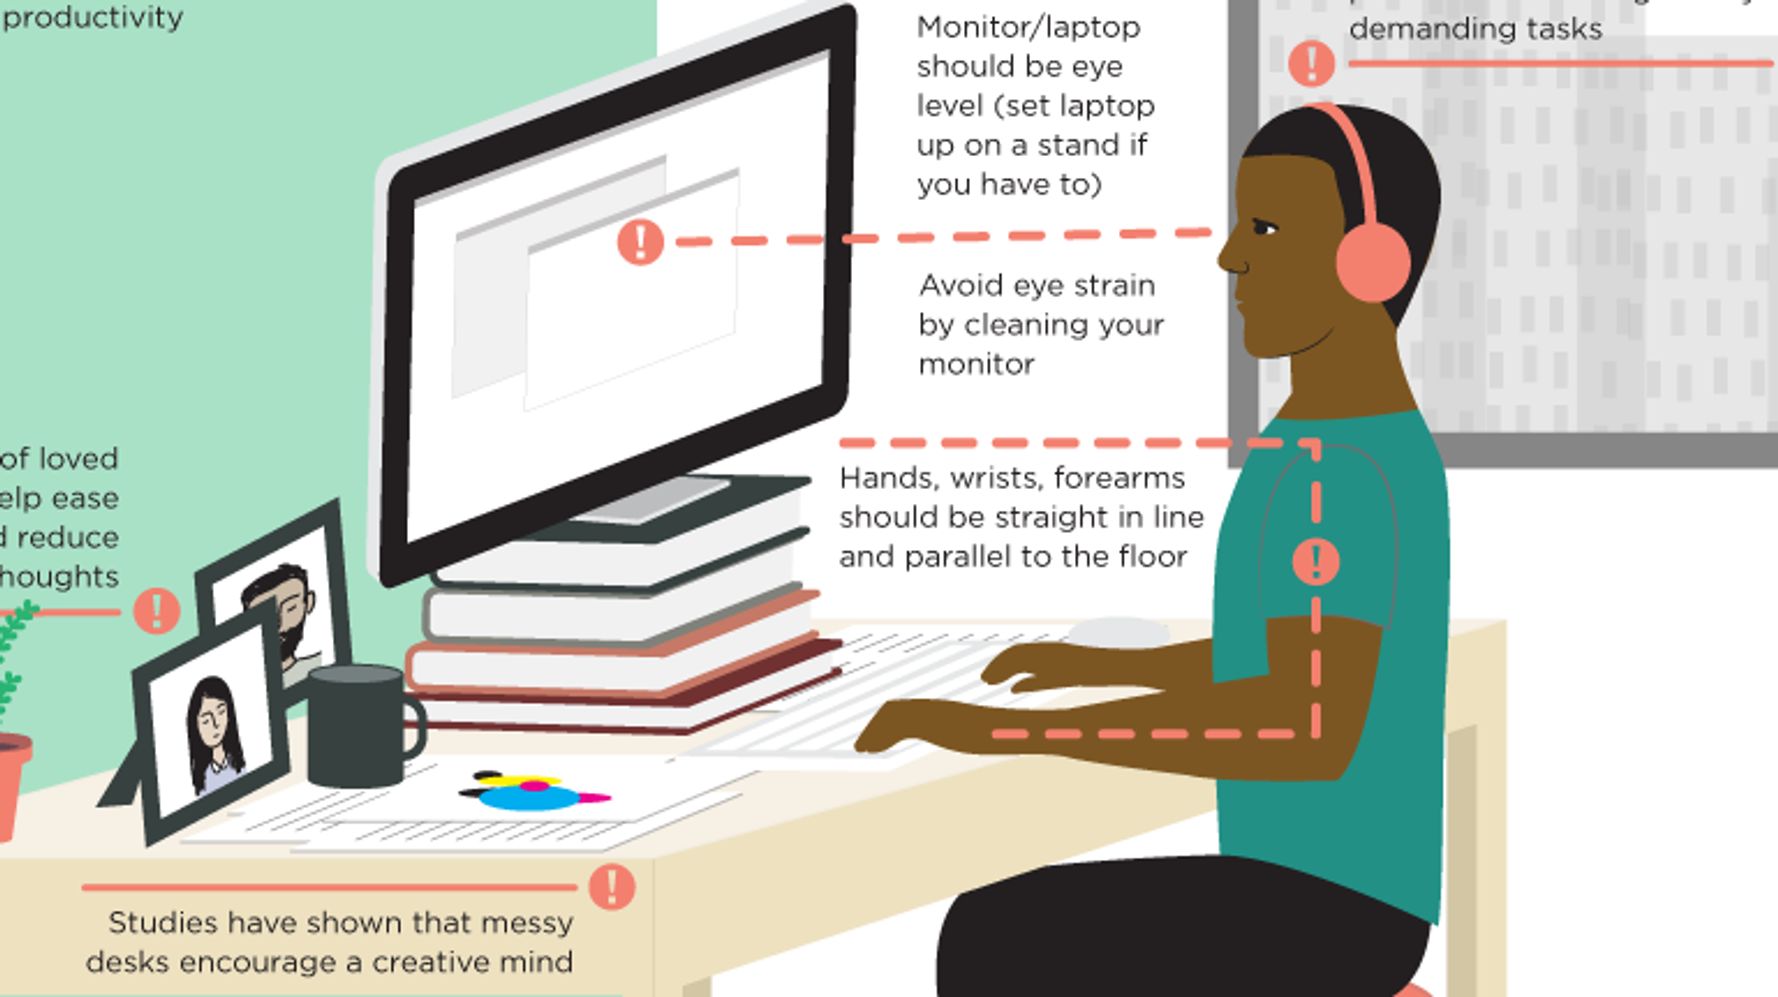 How To Set Your Desk Up For The Most Productive Workday Ever